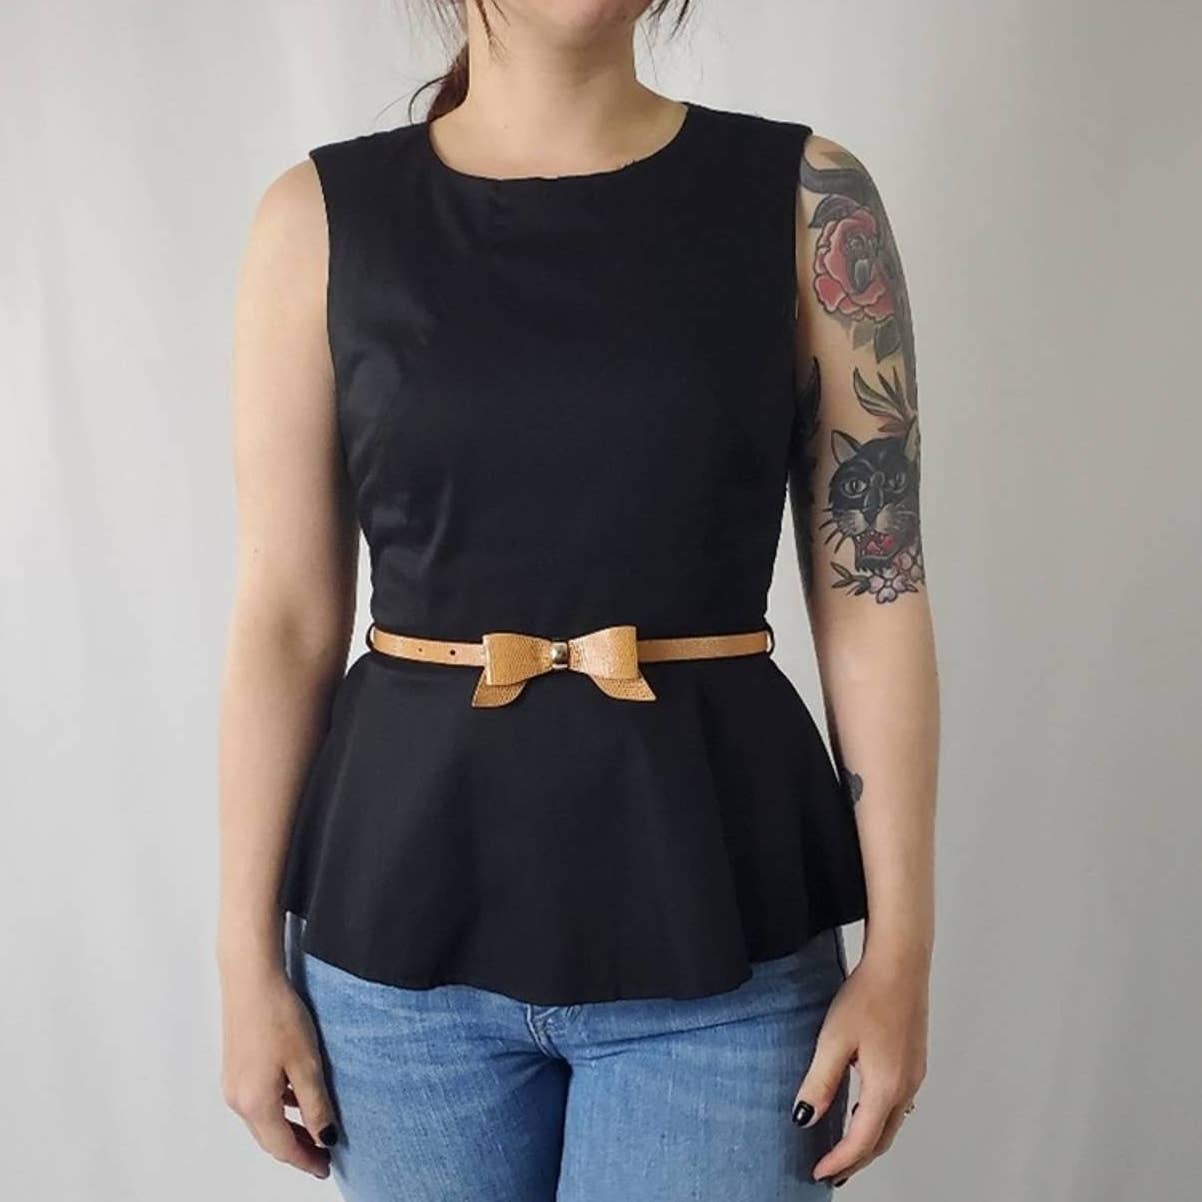 Belted Peplum Cut-out Back Blouse - S